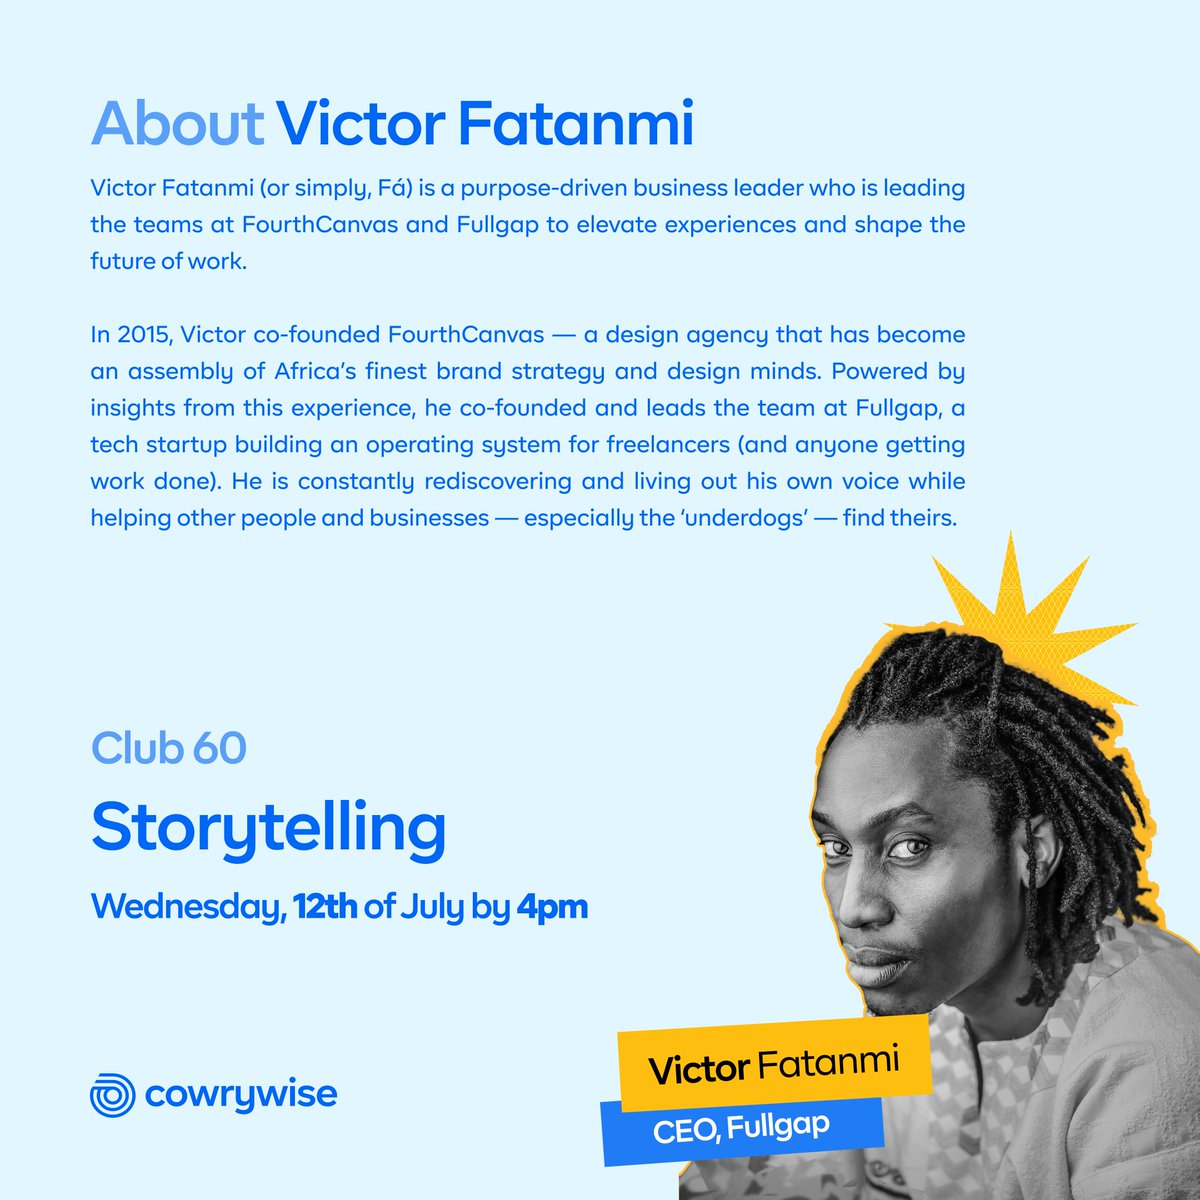 Today!, 
Looking forward to learning from the great @victorfatanmi. ✊🏽
@cowrywise #CampusAmbassador #CLUB60event with @victorfatanmi